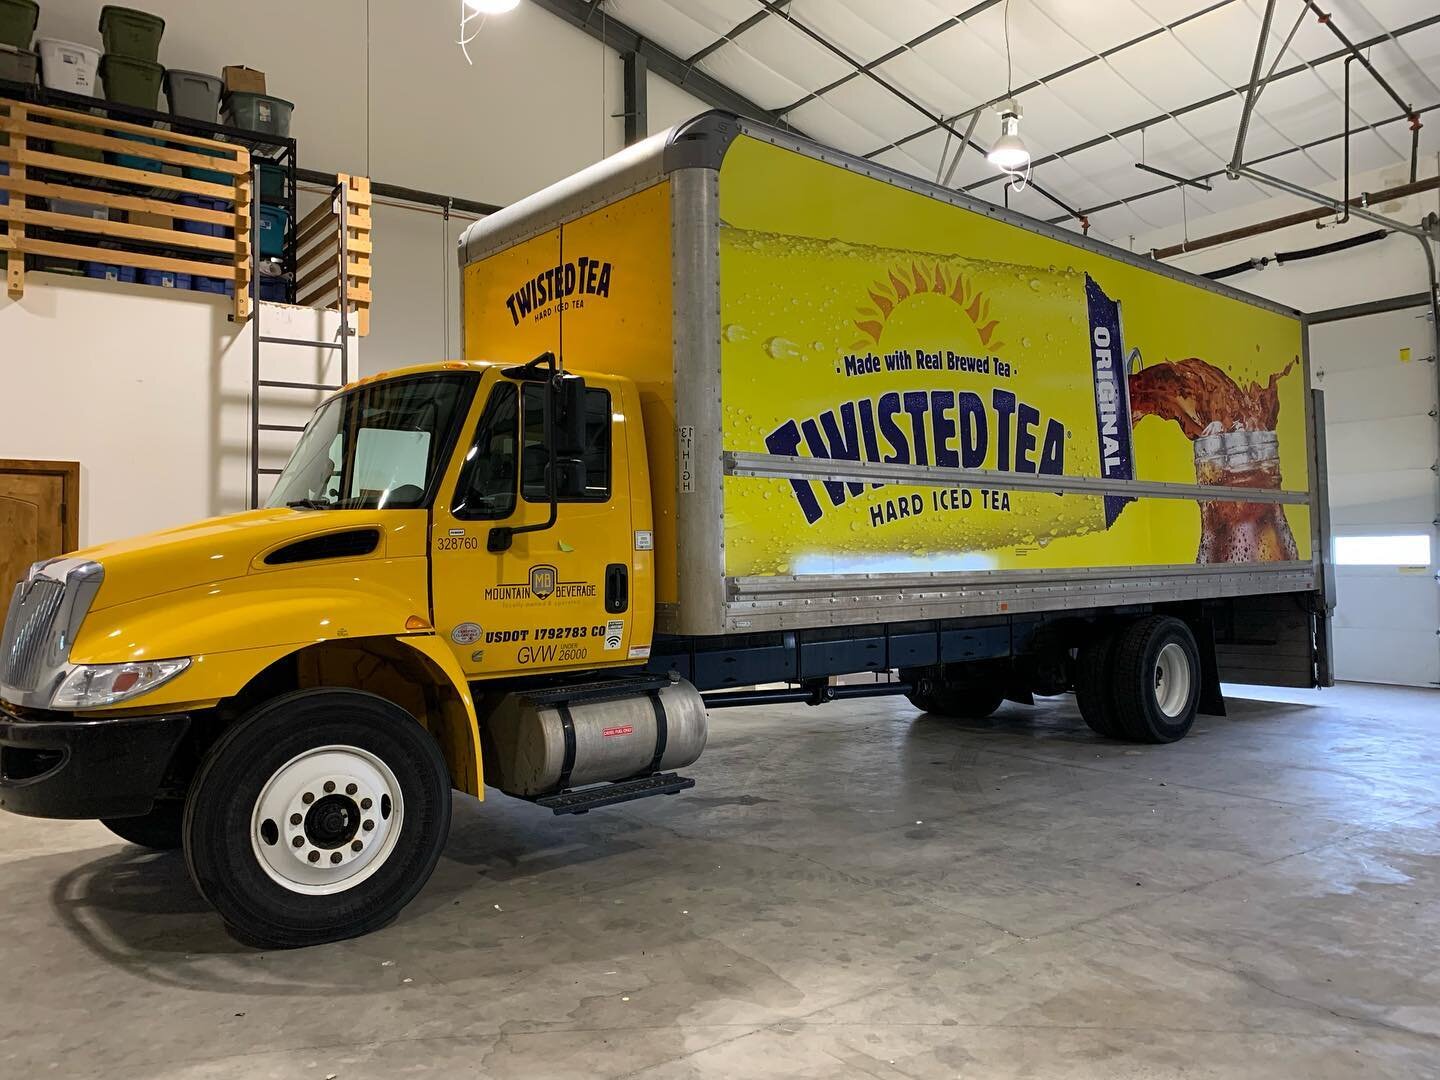 Layed a few beer trailers not to long ago. Love laying large graphics like these. 
.
Looking for an installer for your next project? Message me and let&rsquo;s make your vision come to life.
.
.
.
.
.
.
.
.
.
.

#vinylwrap #carwrap #paintisdead #wrap